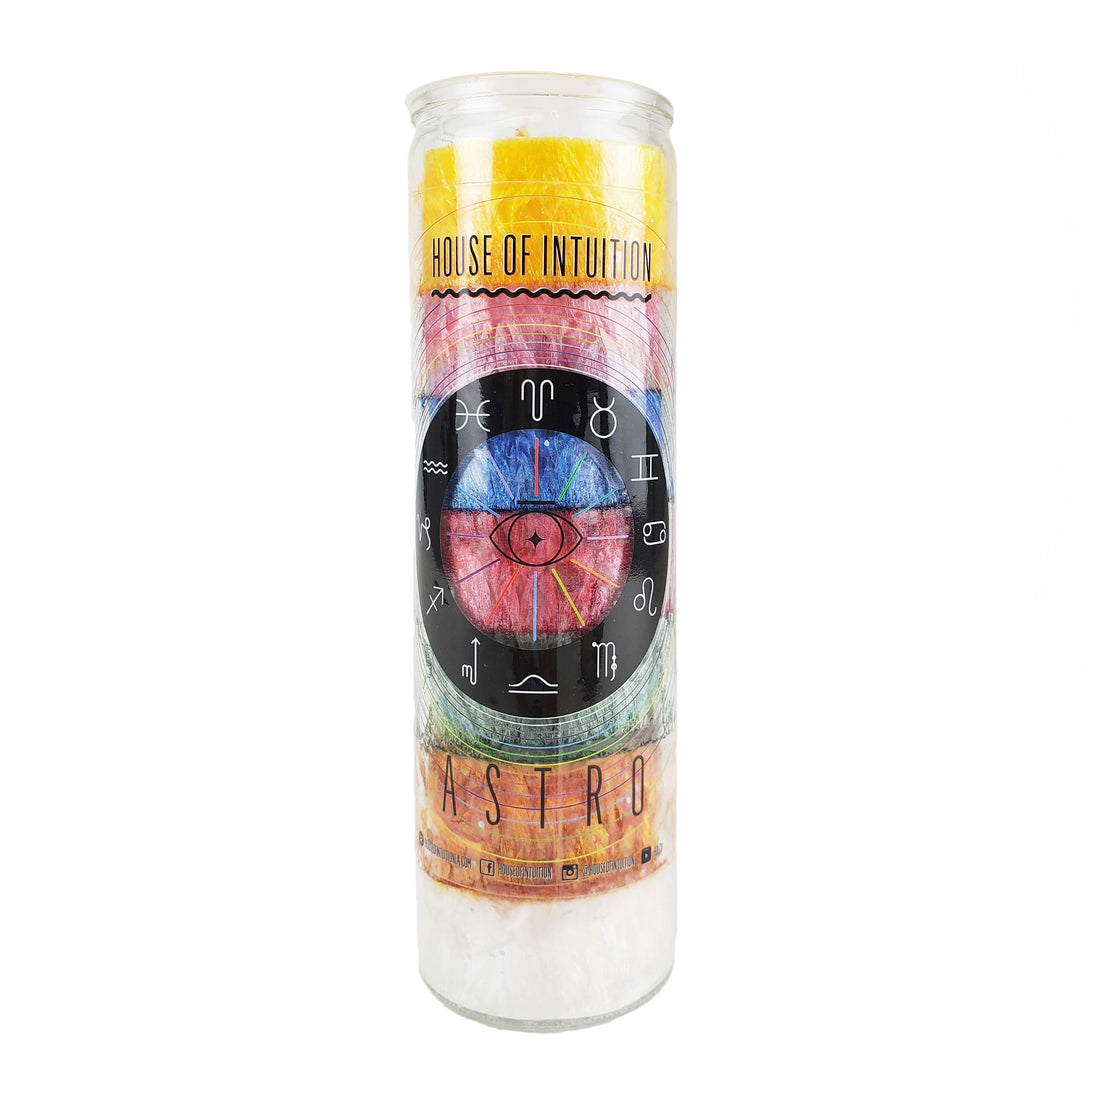 Astrology Lover Zodiac Candle Zodiac Candles House of Intuition 